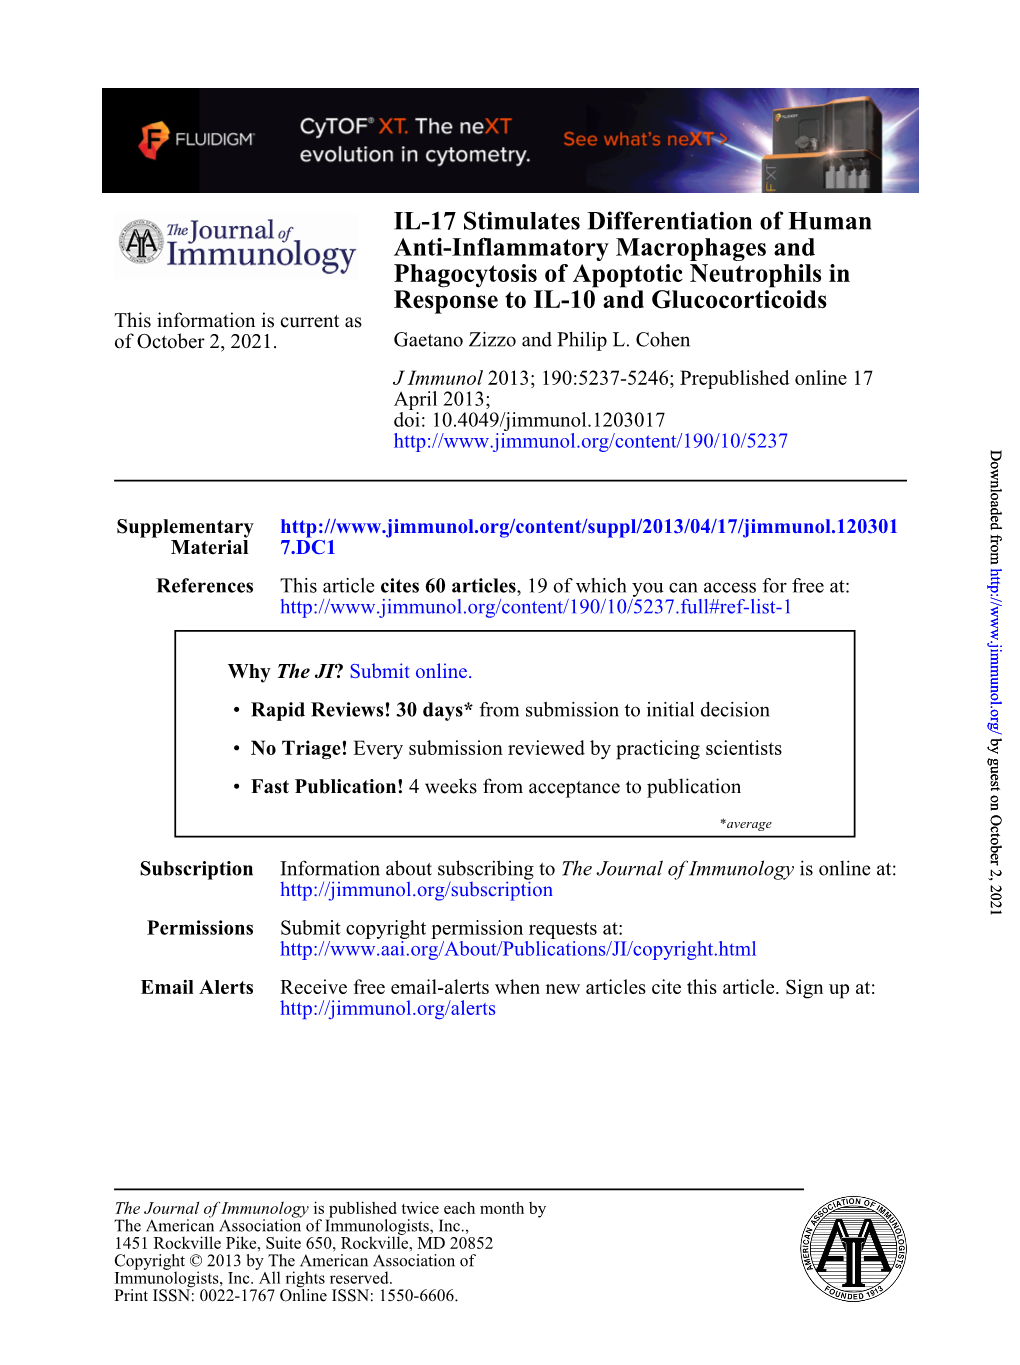 Response to IL-10 and Glucocorticoids Phagocytosis Of